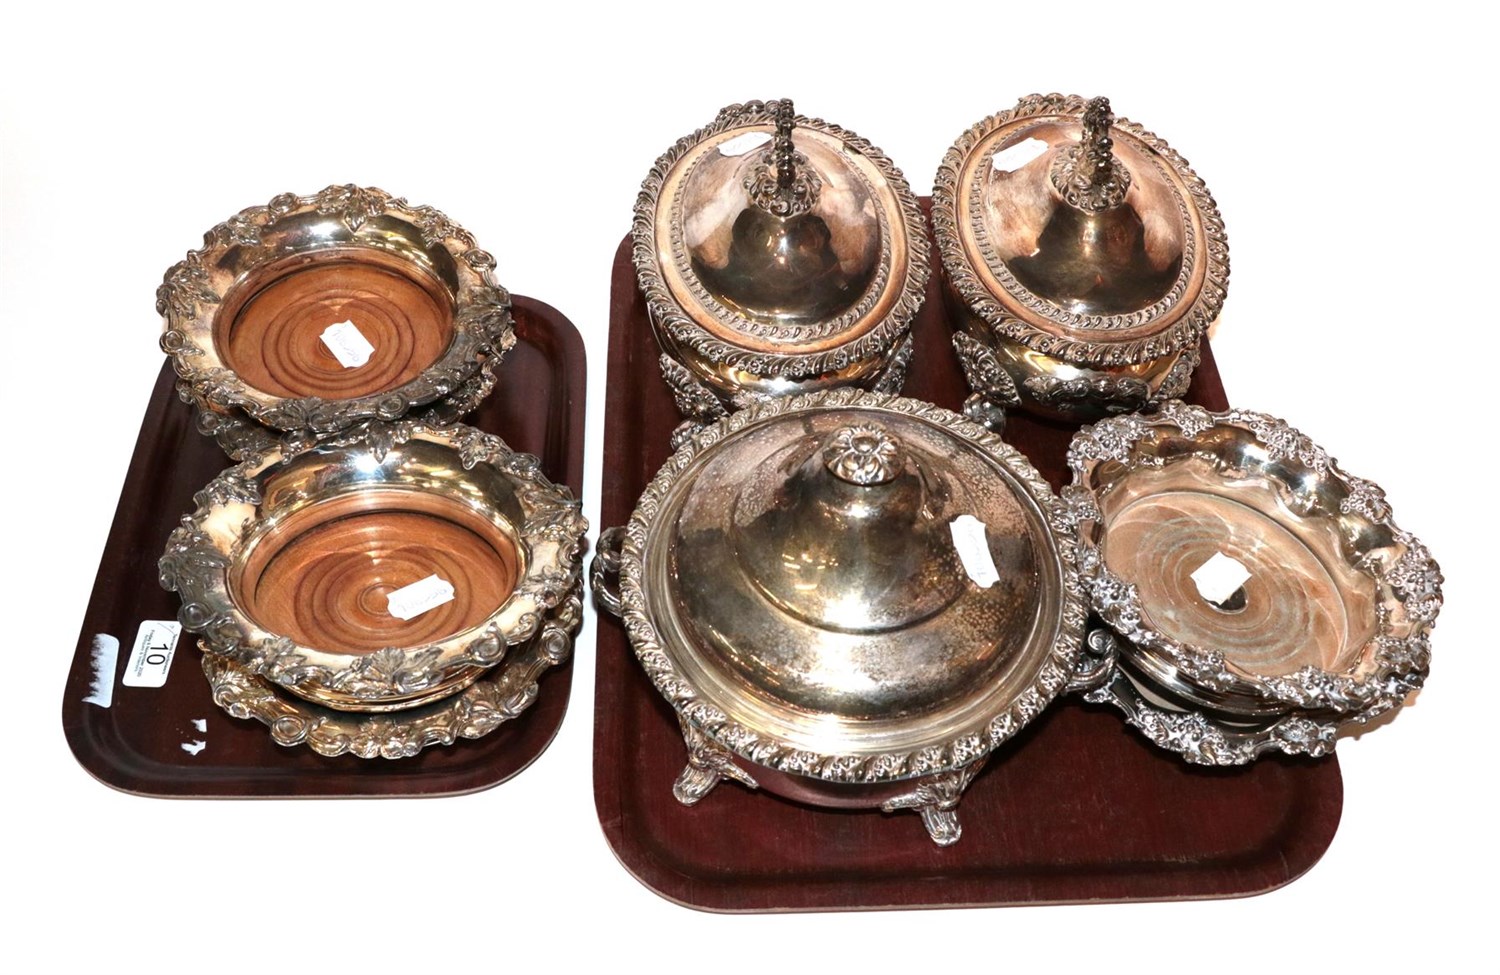 Lot 10 - Three plated tureens with covers together with three pairs of plated wine coasters (9)